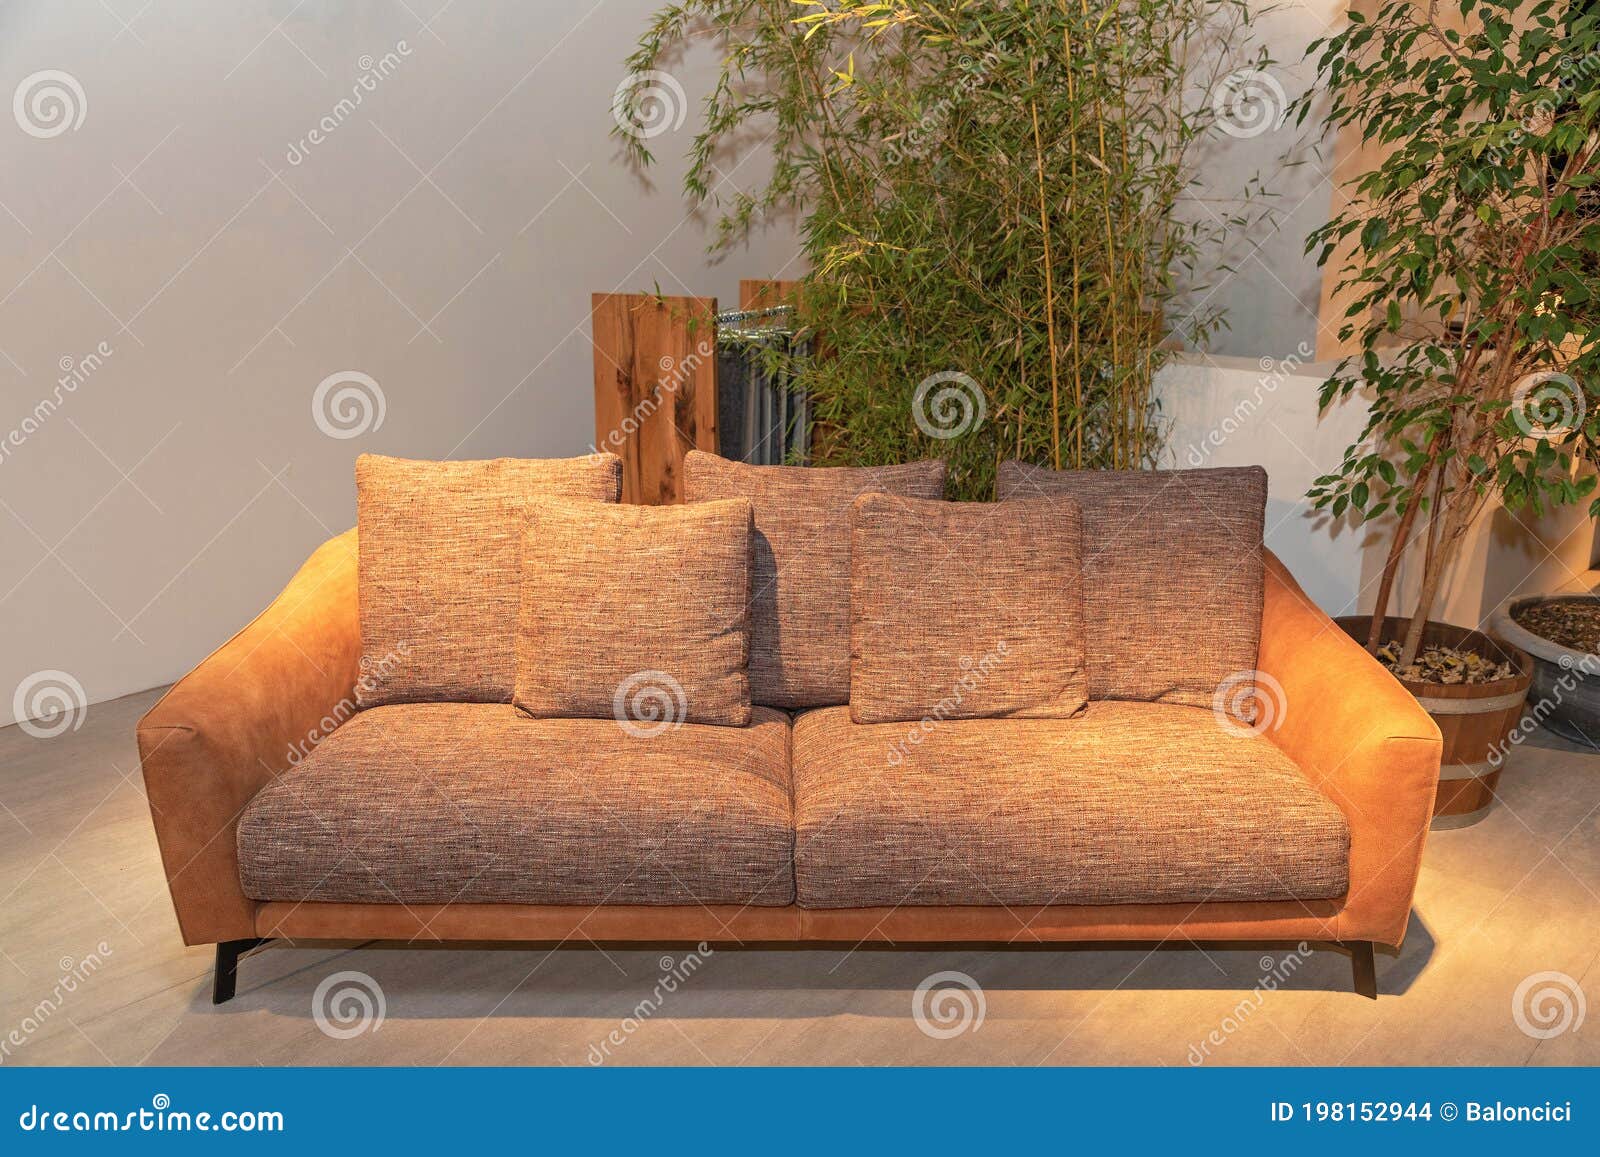 Bamboo Living Room Stock Photo Image Of Room